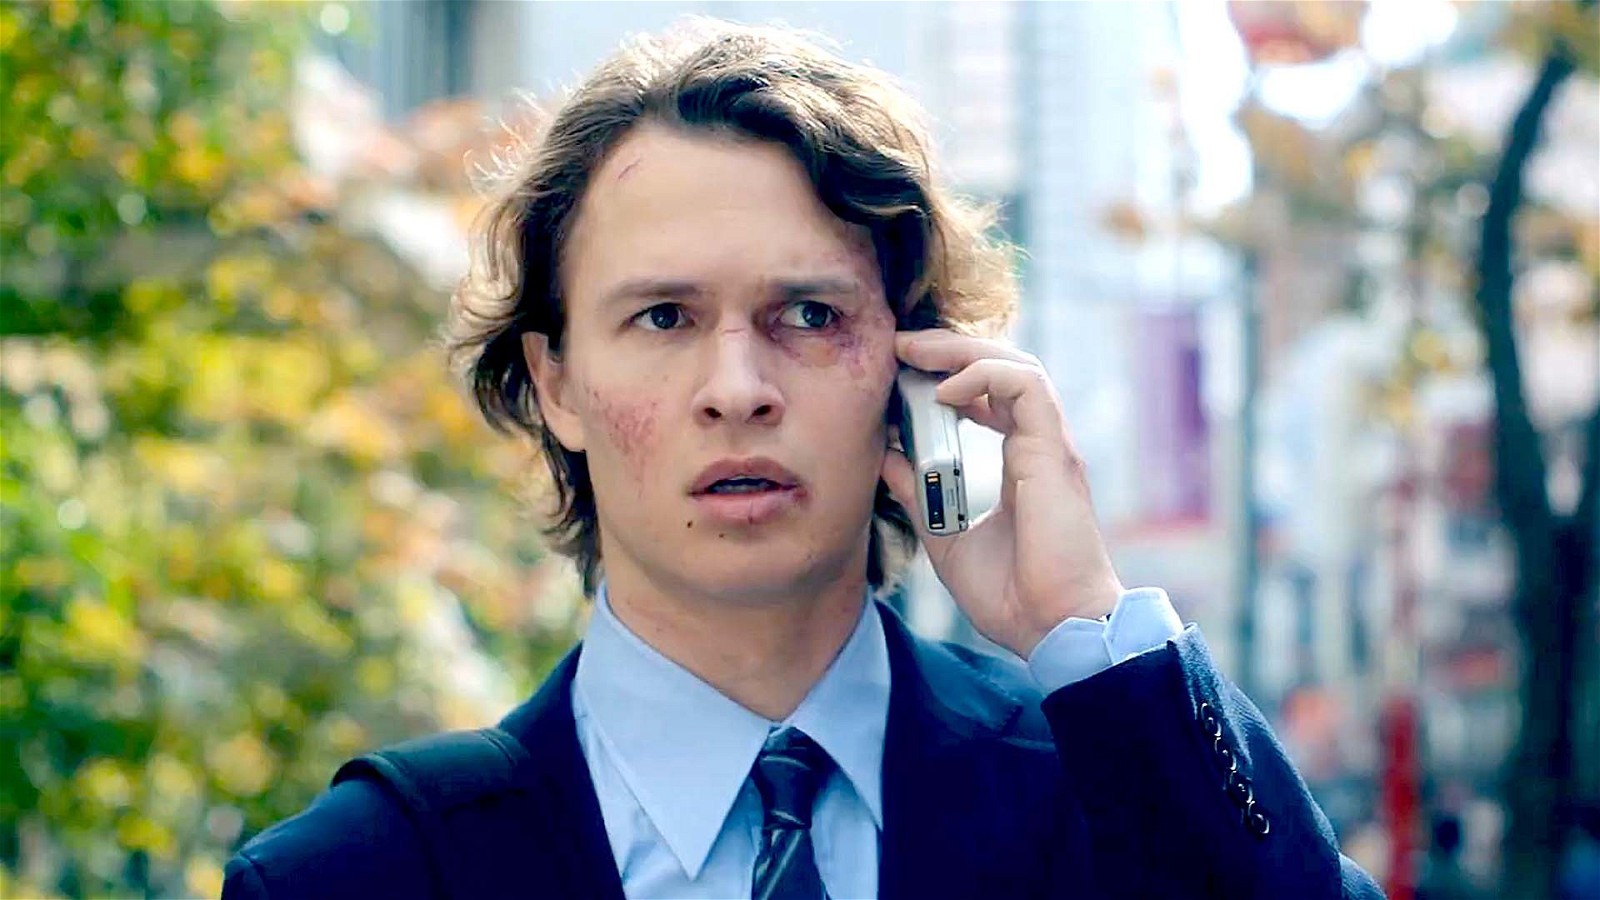 Tokyo vice season 2 will end with a bang according to Ansel Elgort